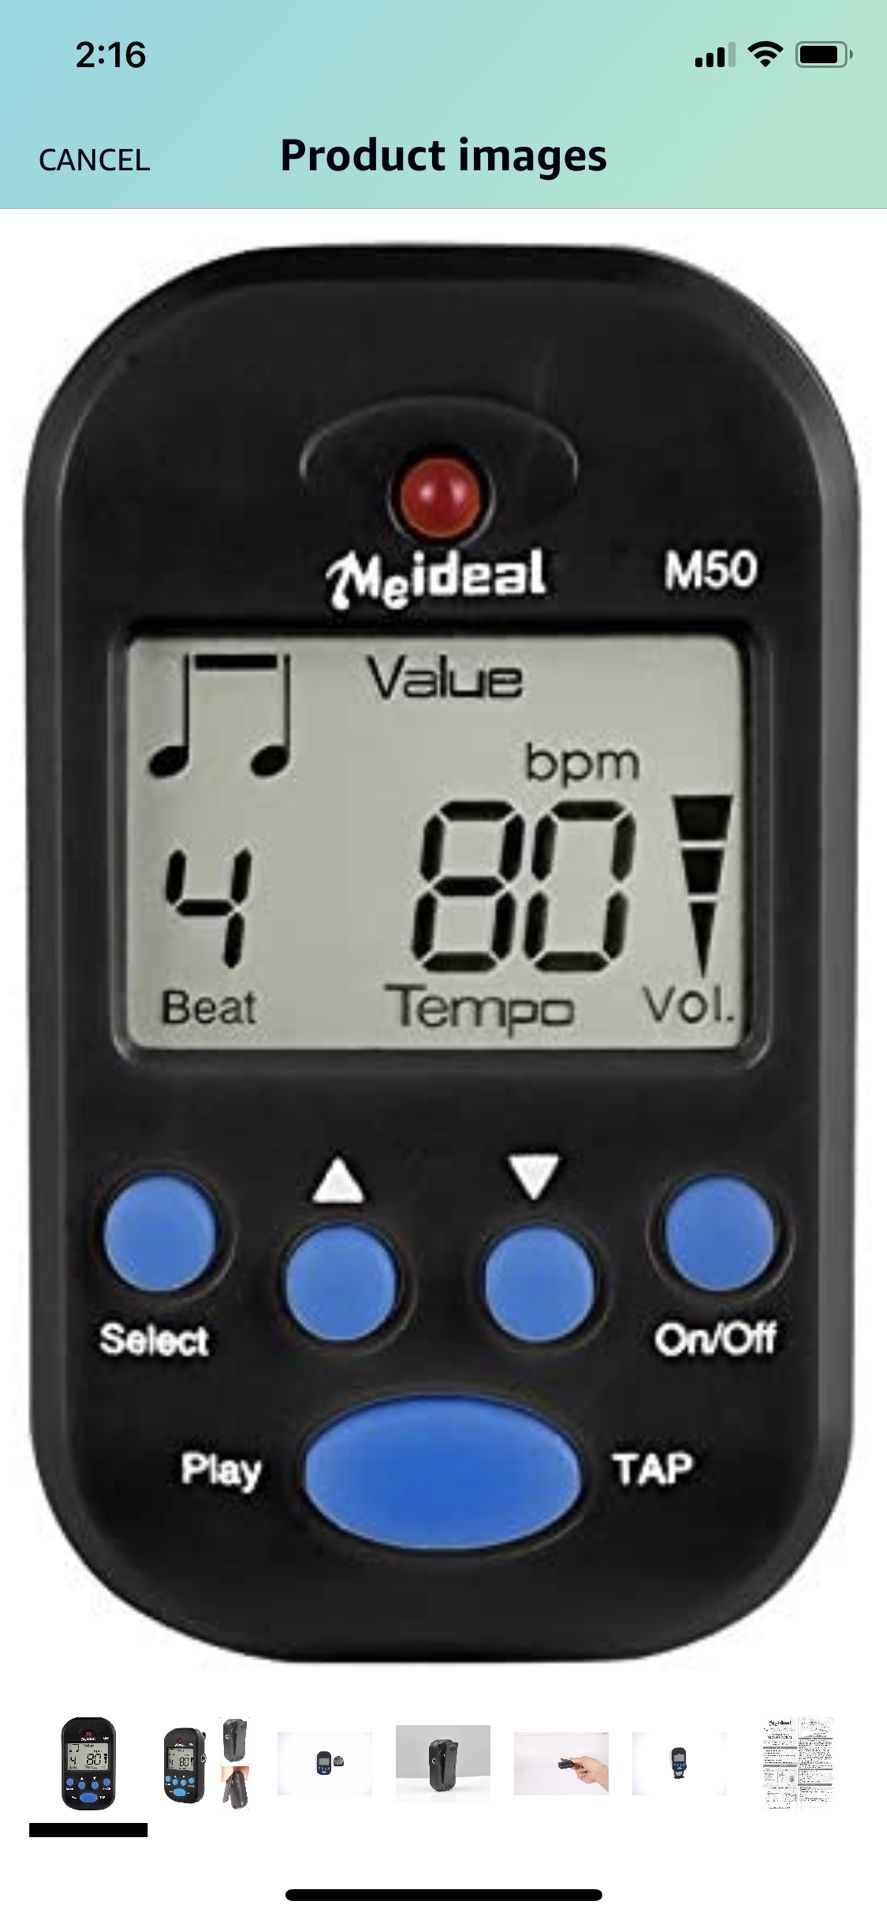 Metronome,Digital Metronome,Electronic Metronome,Clip On With Battery,Suitable for Piano,Violin,Guitar,Drum,Running,Dancing - Black